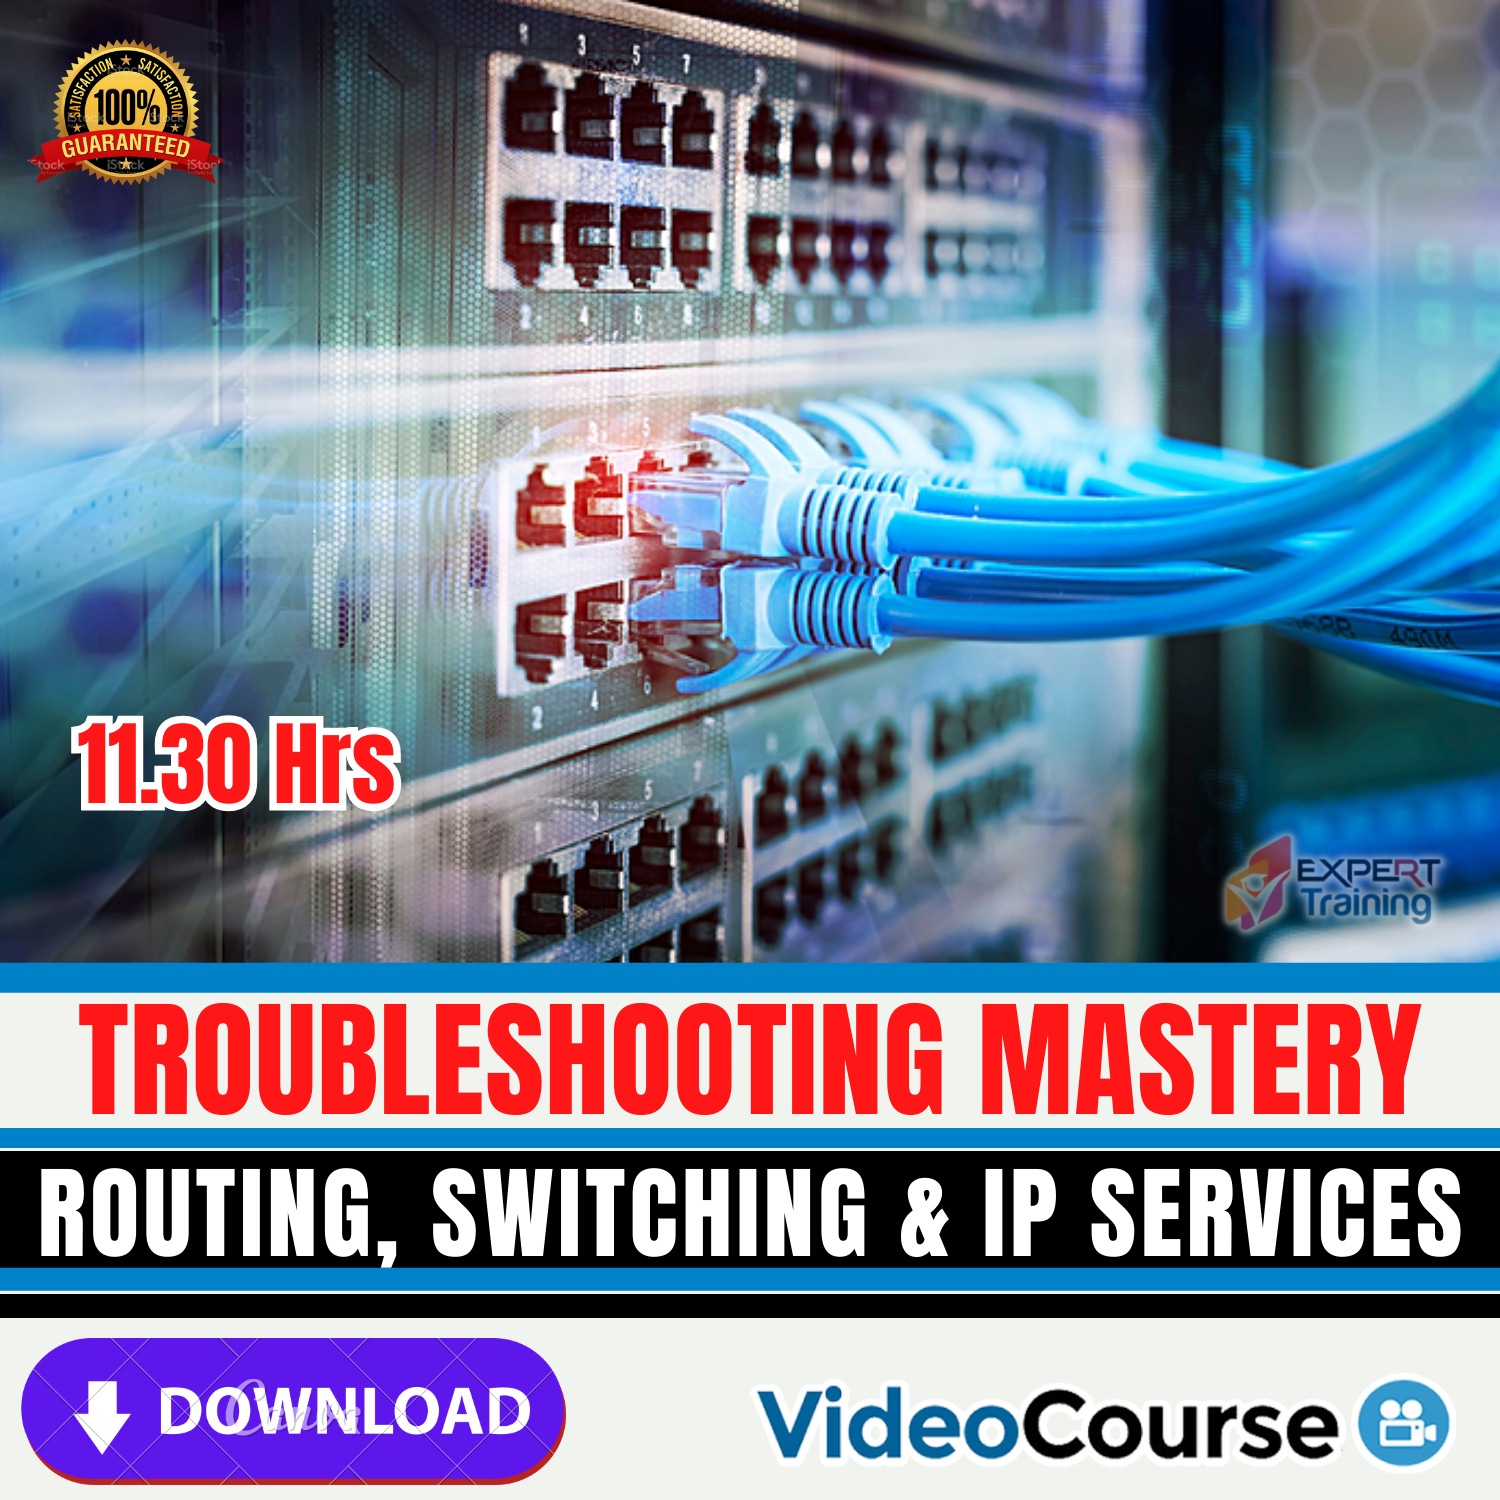 Troubleshooting Mastery ‑ Routing, Switching & IP Services